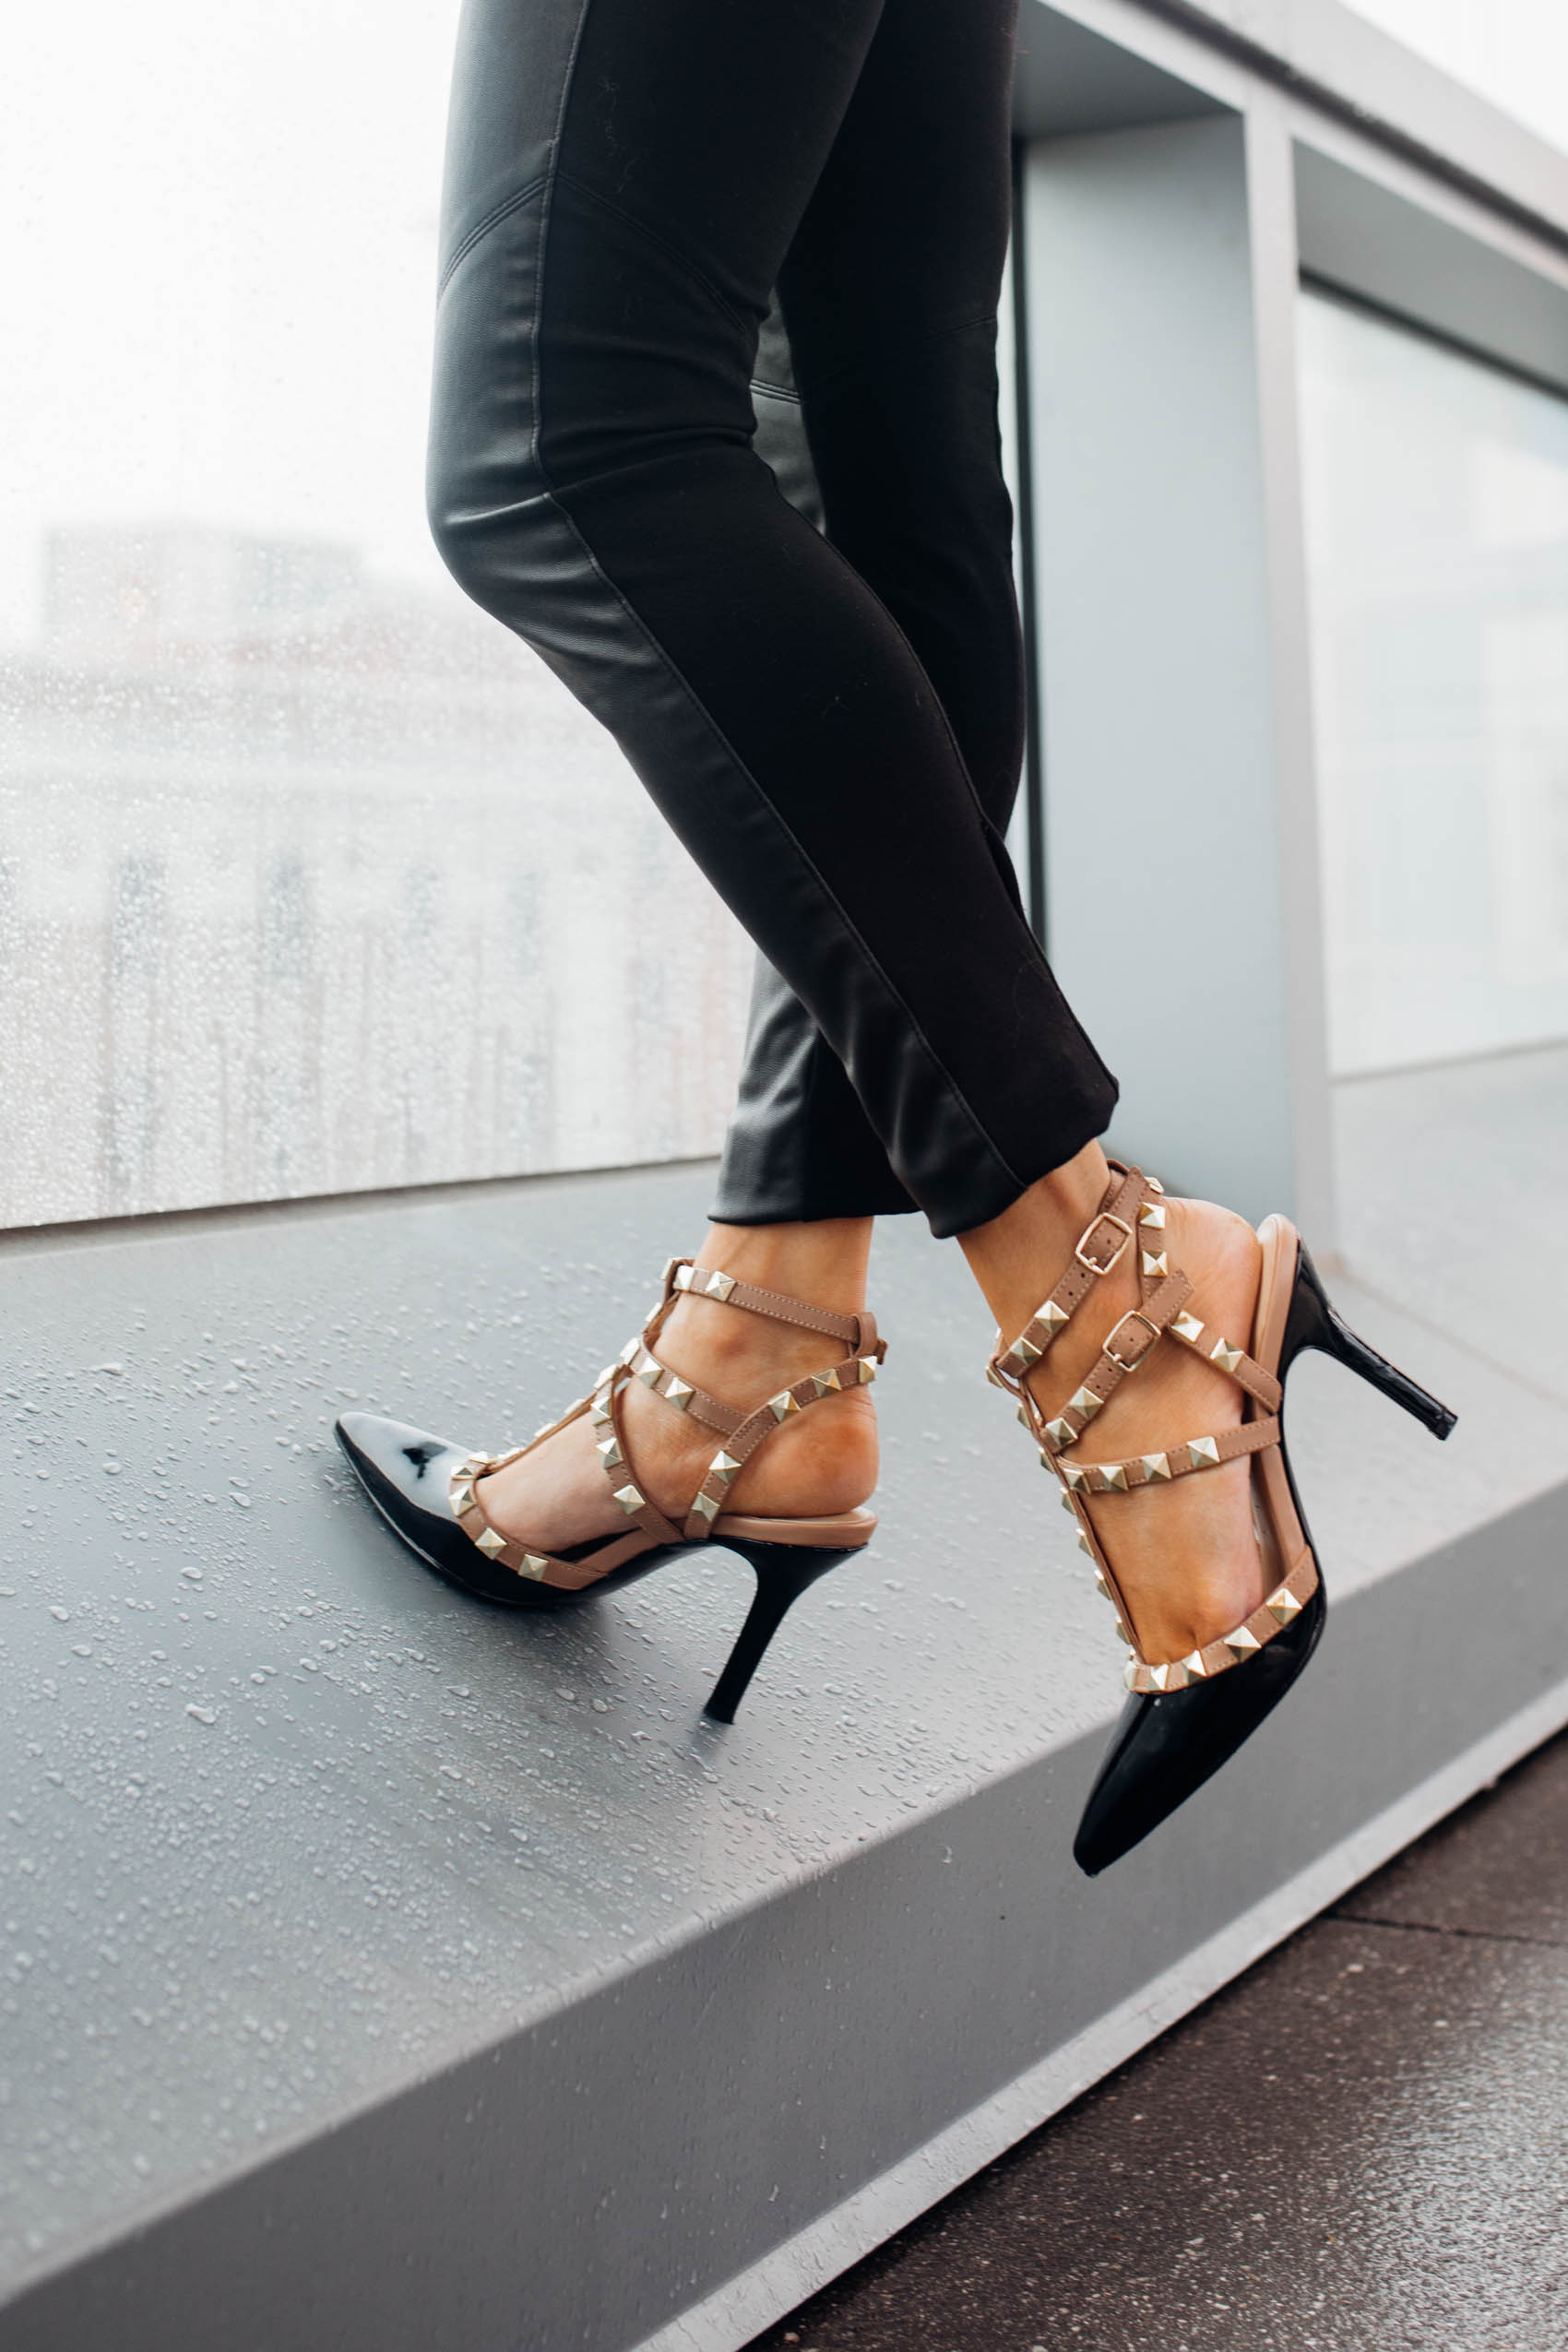 Blogger Hoang-Kim wears a pair of black patent leather studded strappy heels